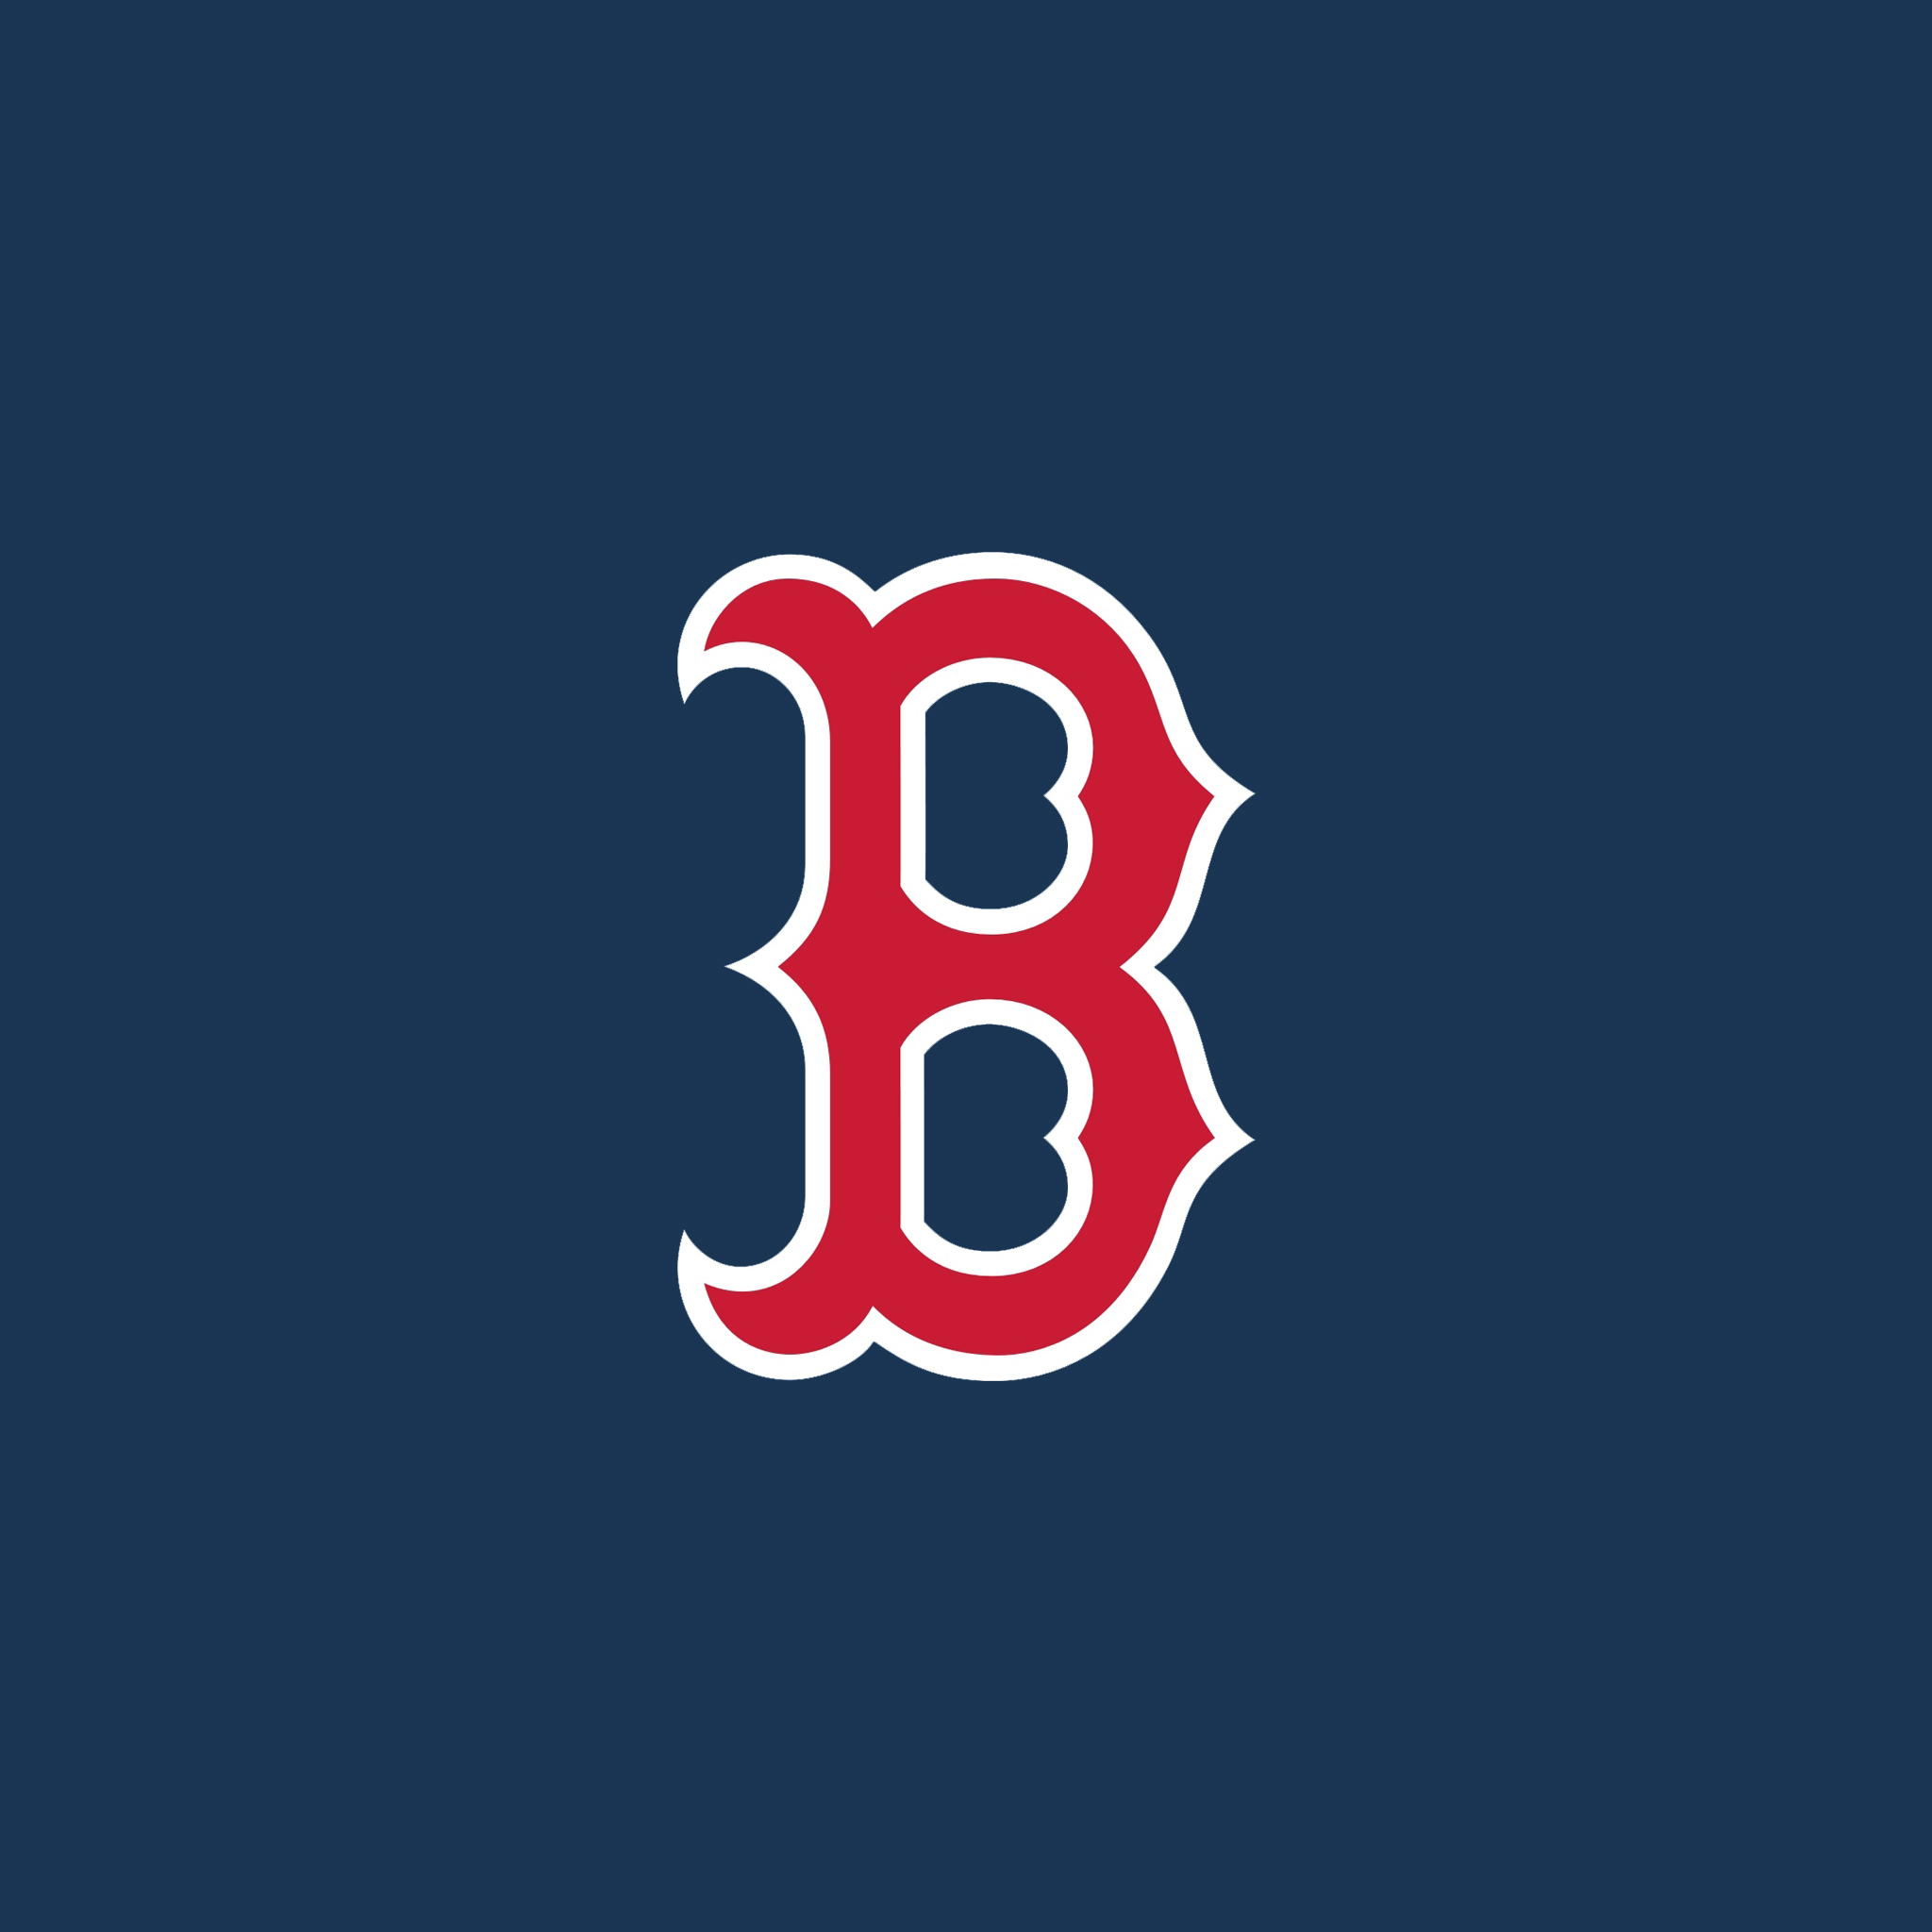 Boston Red Sox wallpapers | Boston Red Sox background - Page 5